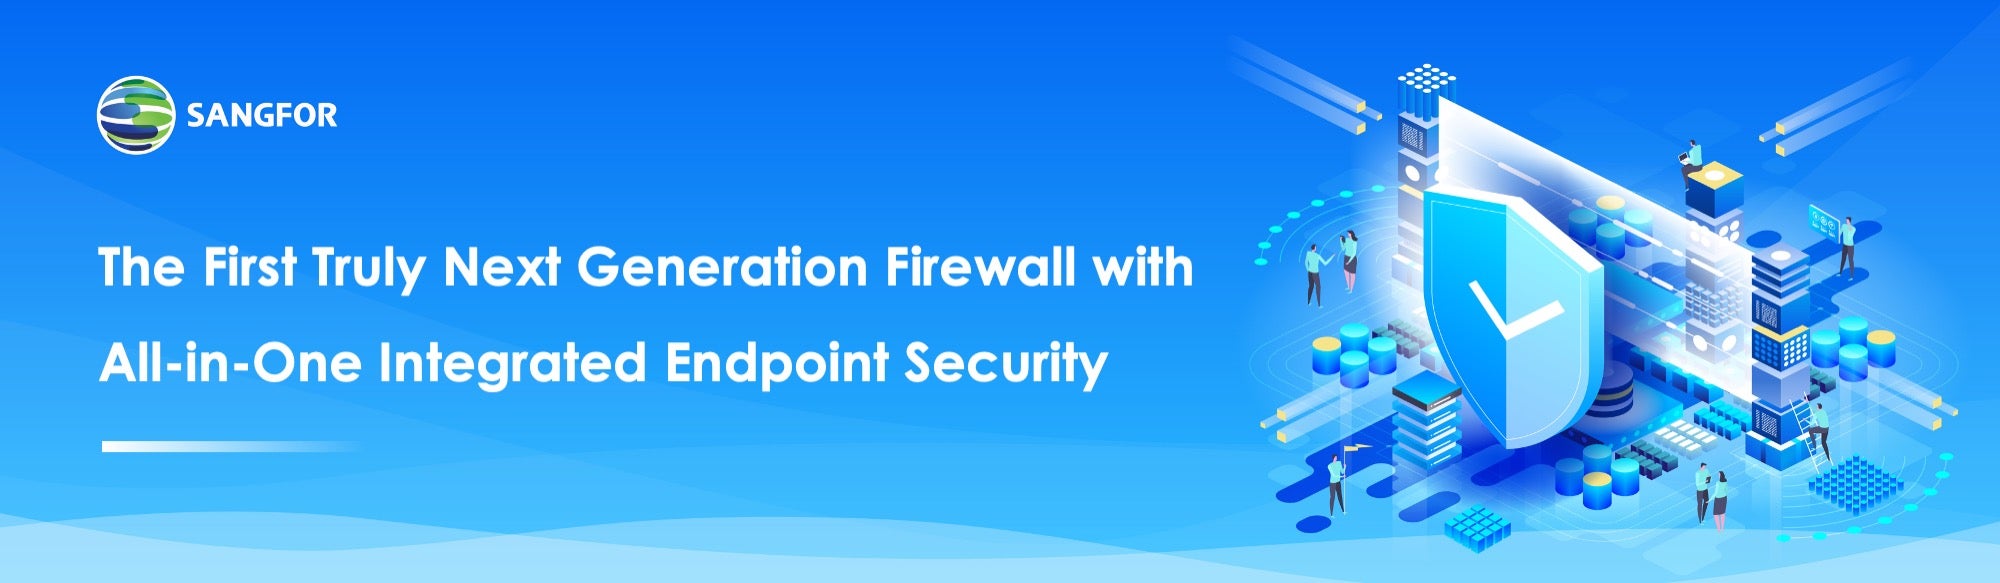 All-in-One Next-Generation Firewall & Endpoint Security